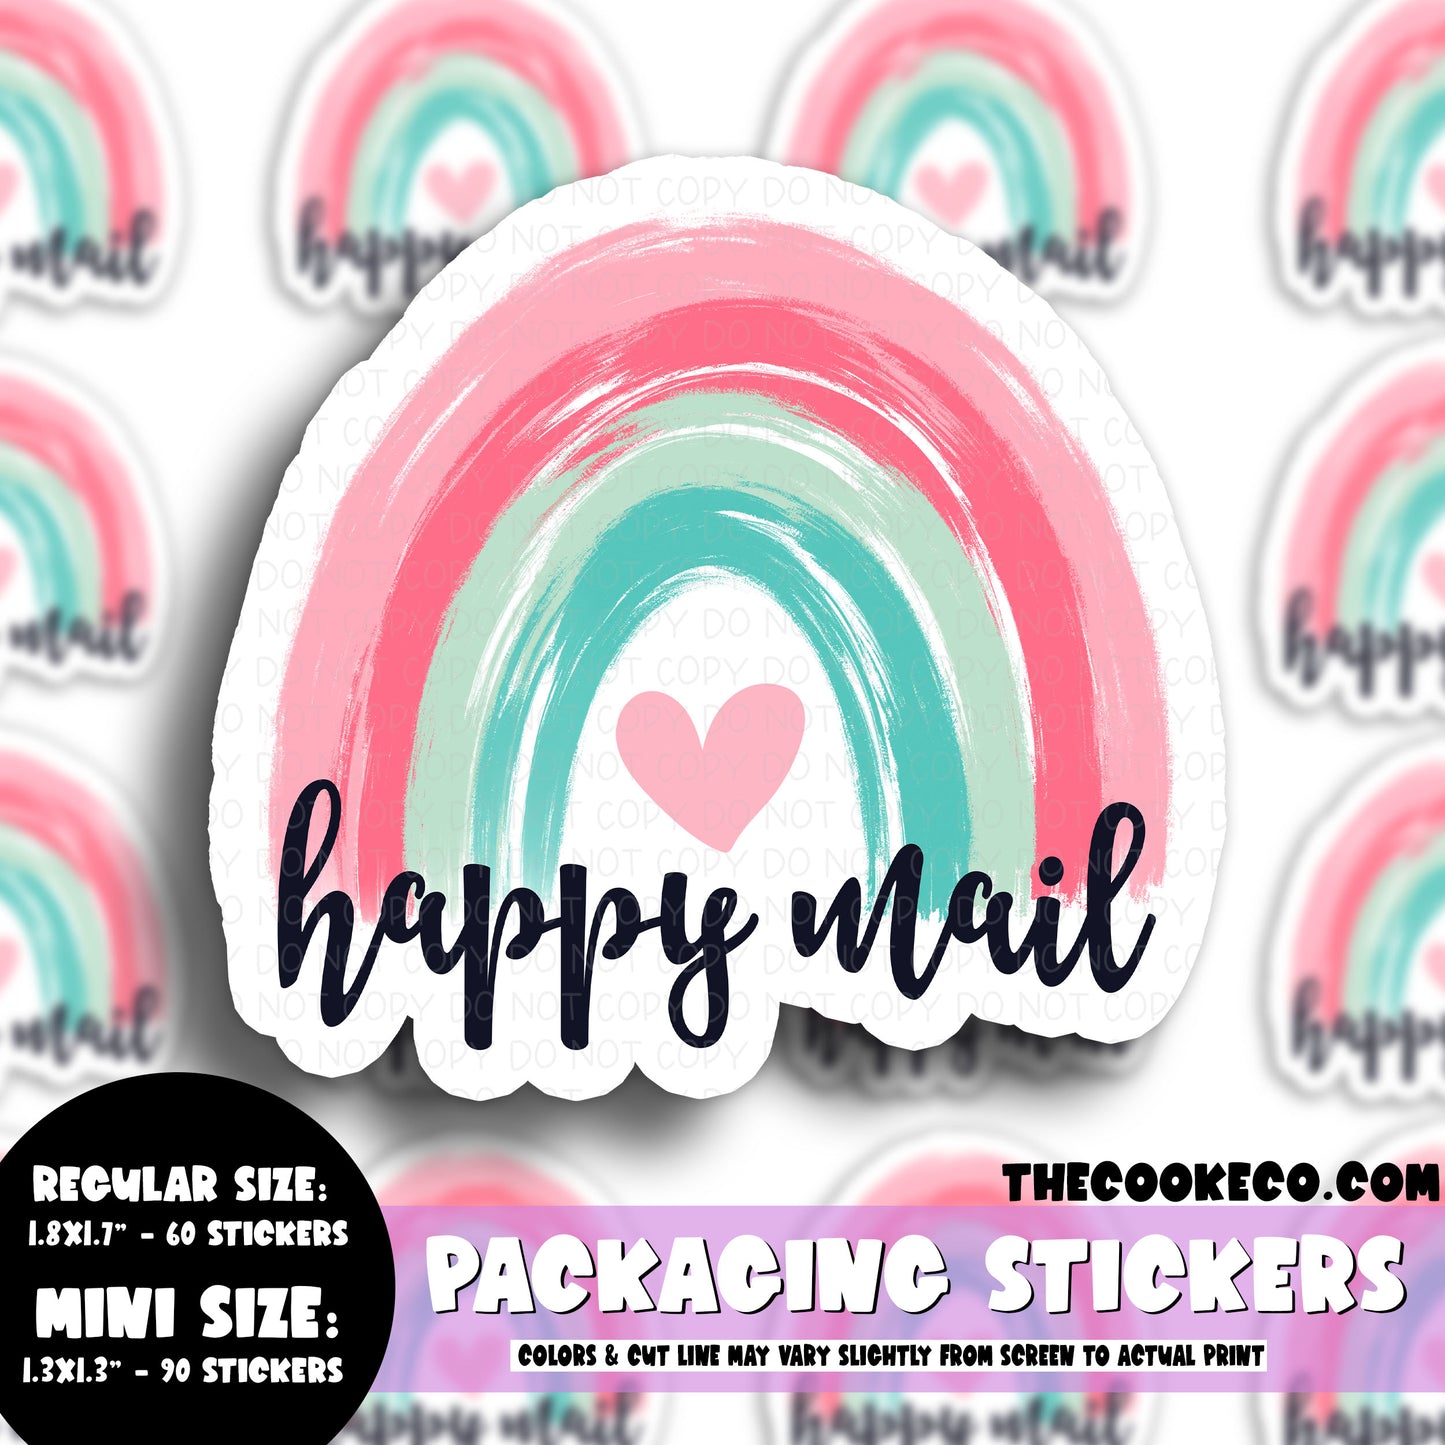 PTO Packaging Stickers | #C0549 - HAPPY MAIL PASTEL RAINBOW